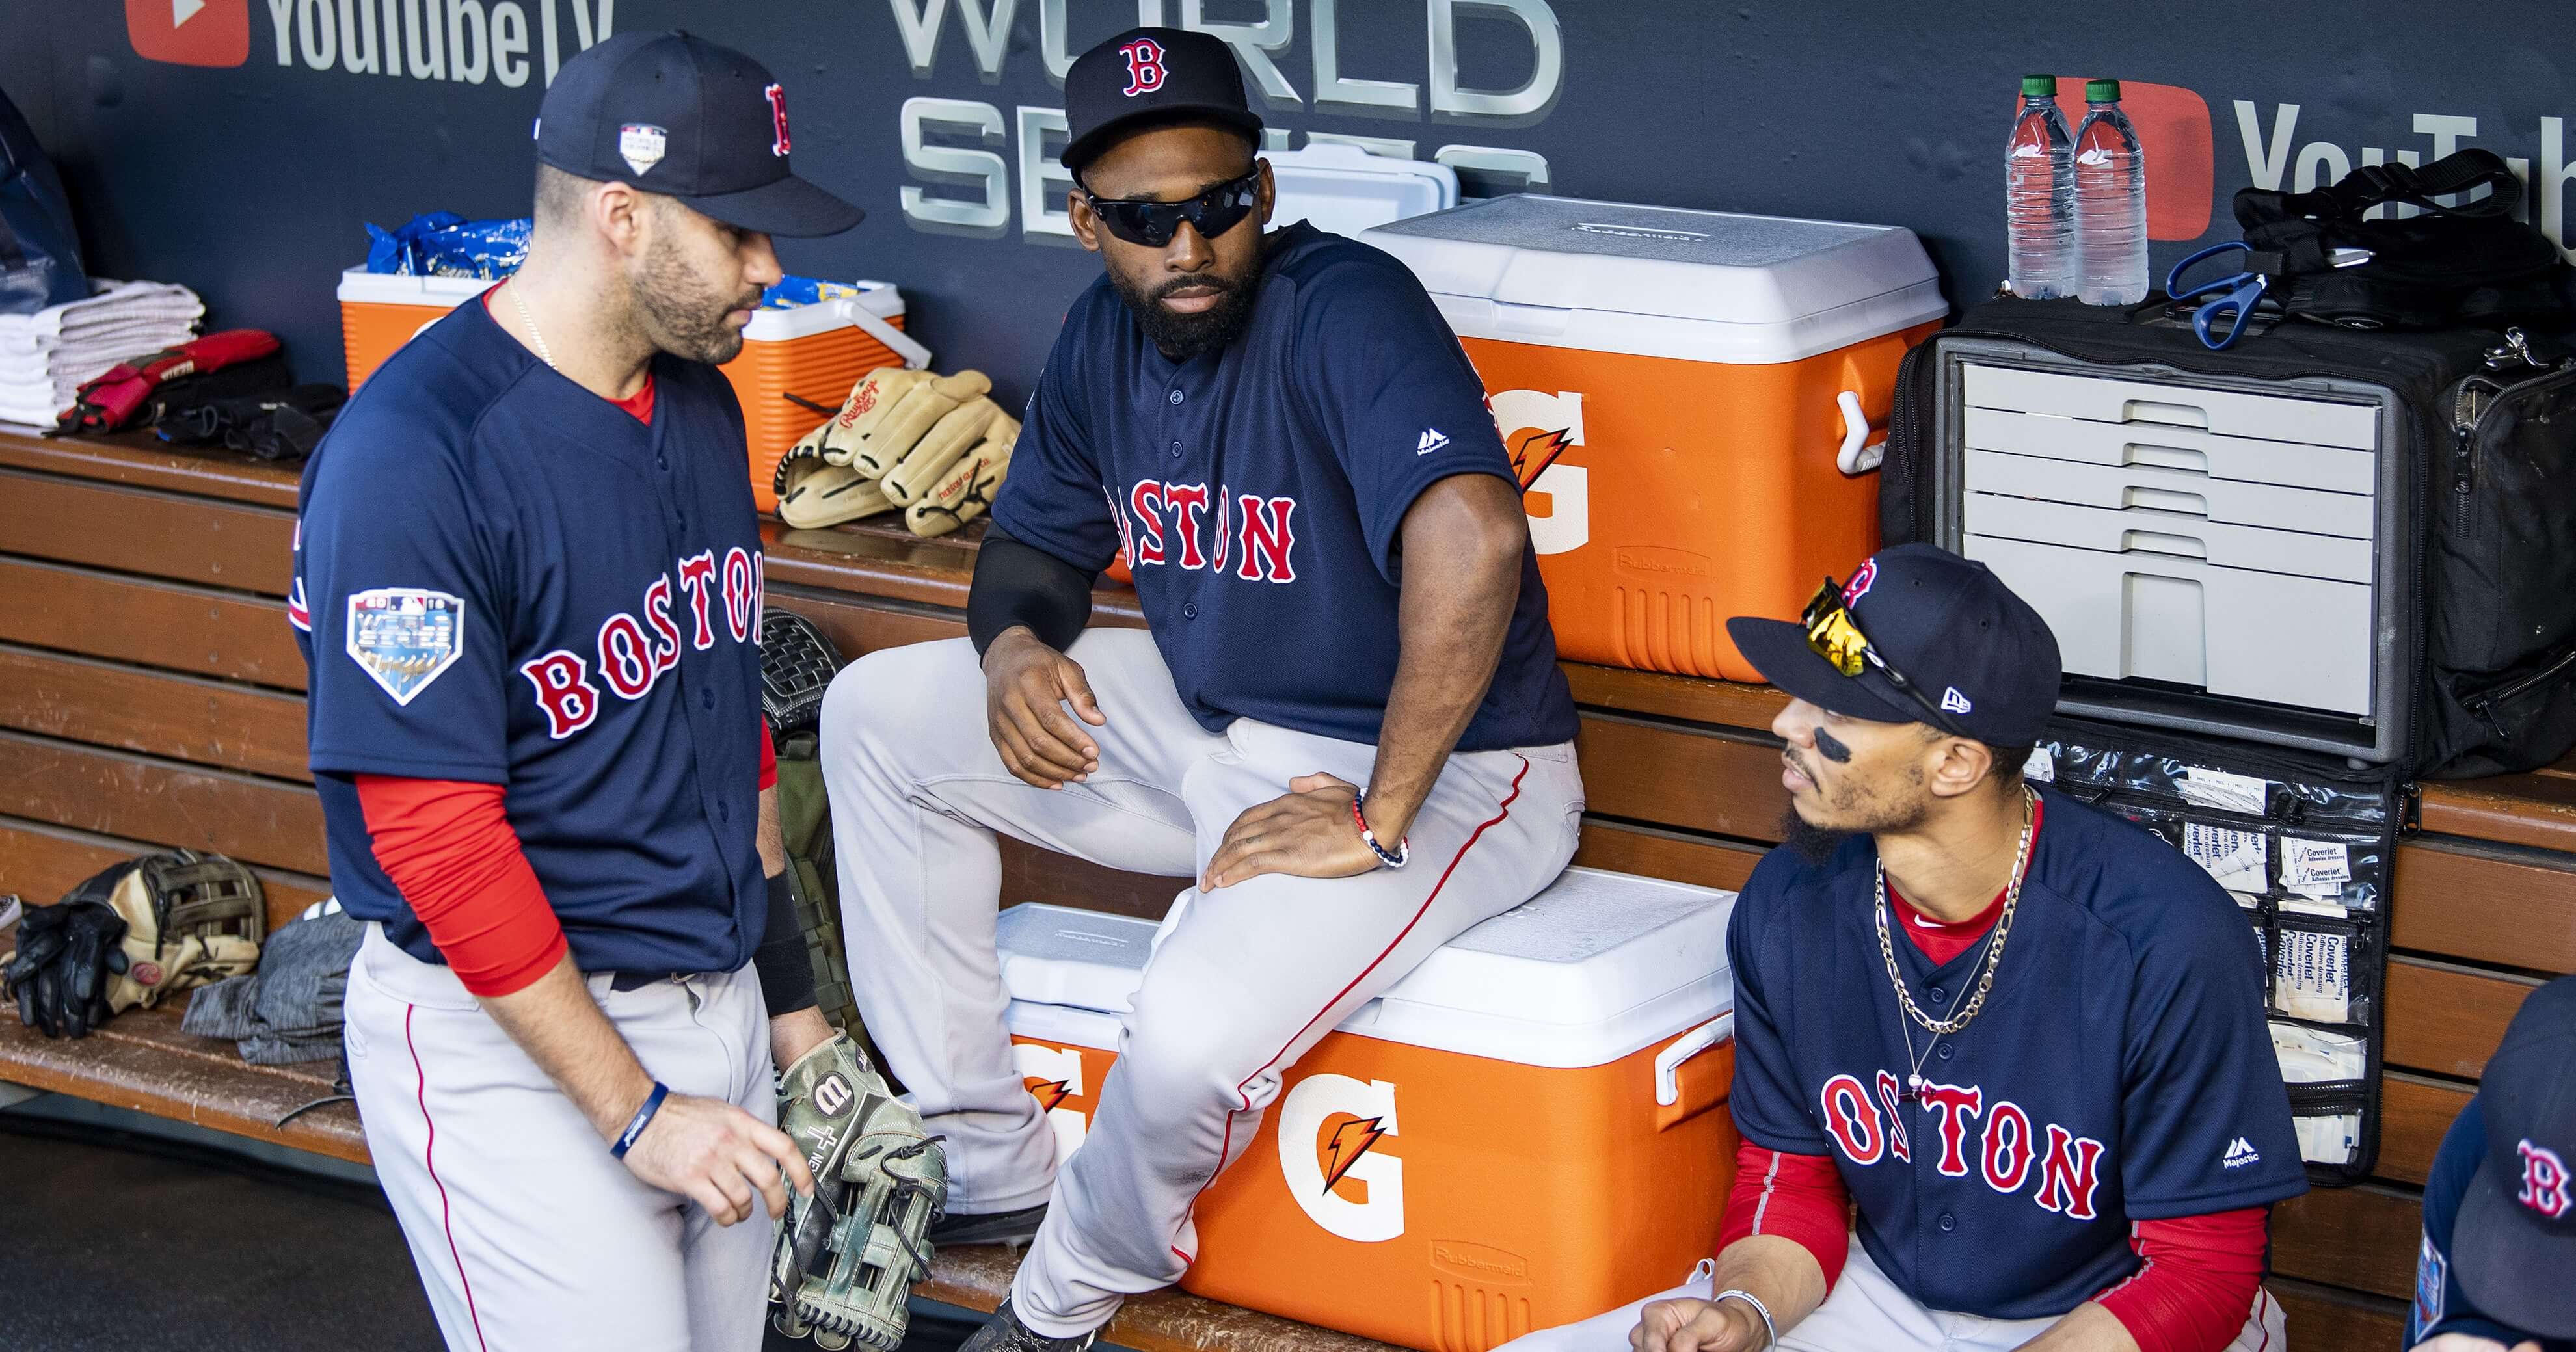 Jackie Bradley Jr., center, talks with Boston Red Sox teammates J.D. Martinez, left, and Mookie Betts before Game 3 of the 2018 World Series against the Los Angeles Dodgers on Oct. 26.